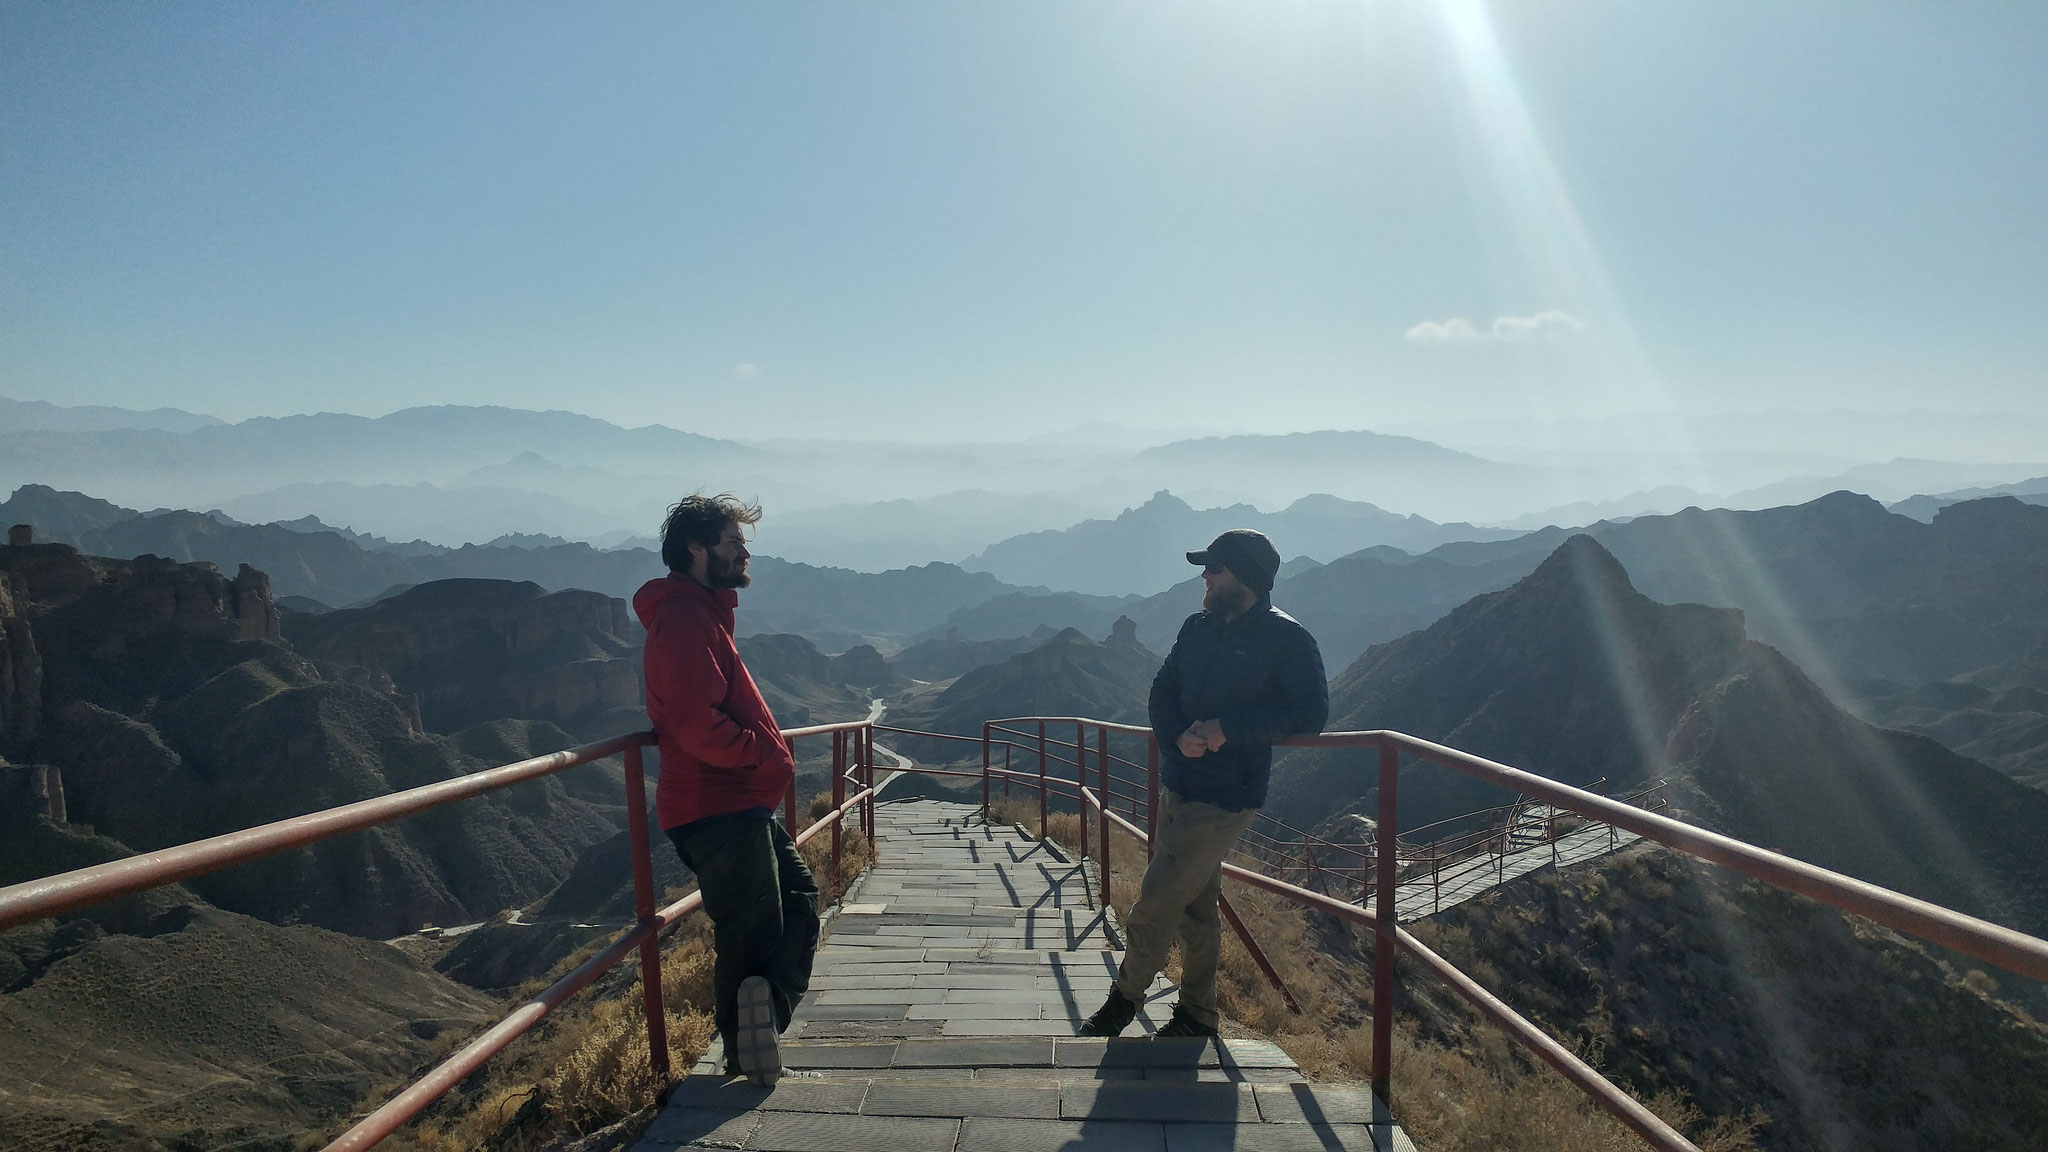 Timb and Paul at a National Geological Park outside Zhangye. Photo taken by Vivian Luo.